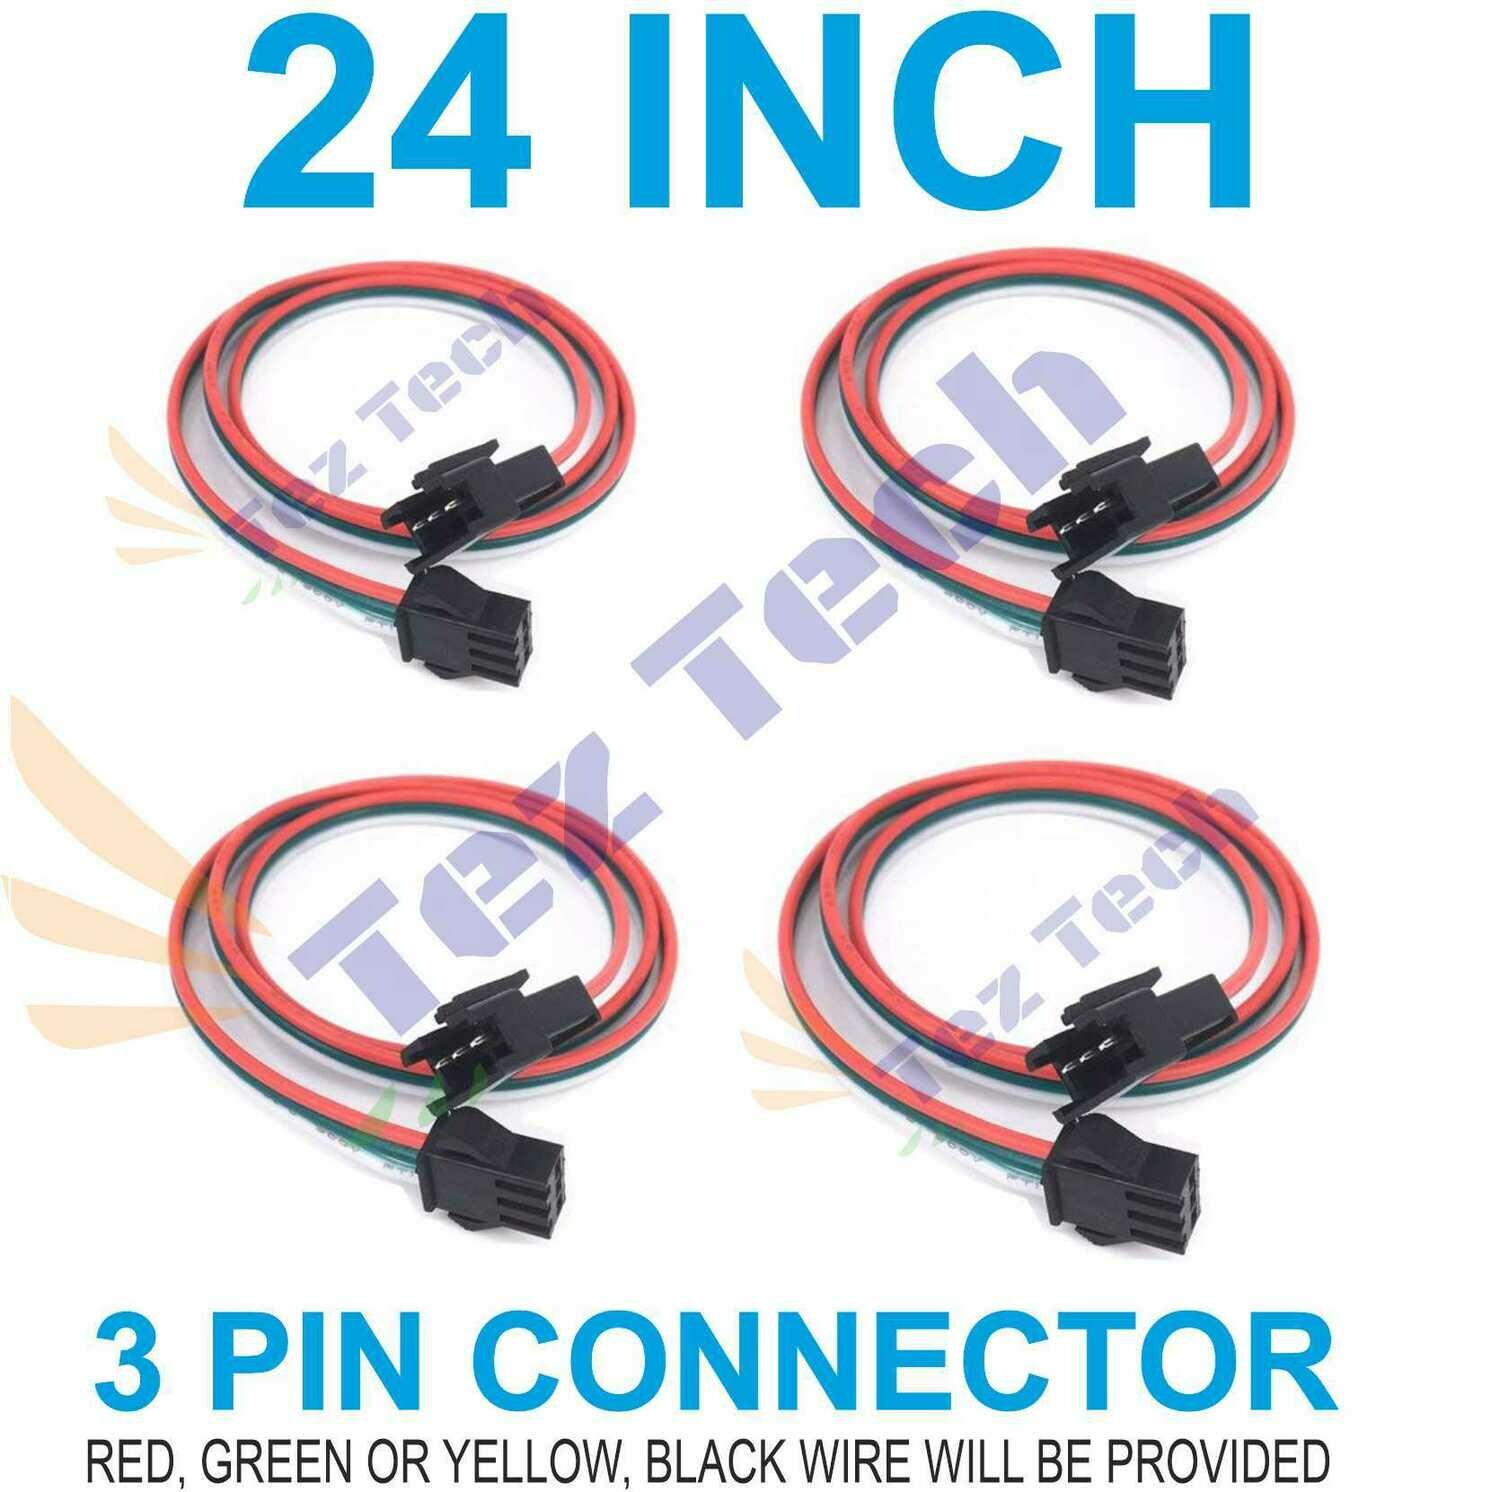 (RMCNN53) 24 INCH MALE-FEMALE 3 PIN CONNECTOR